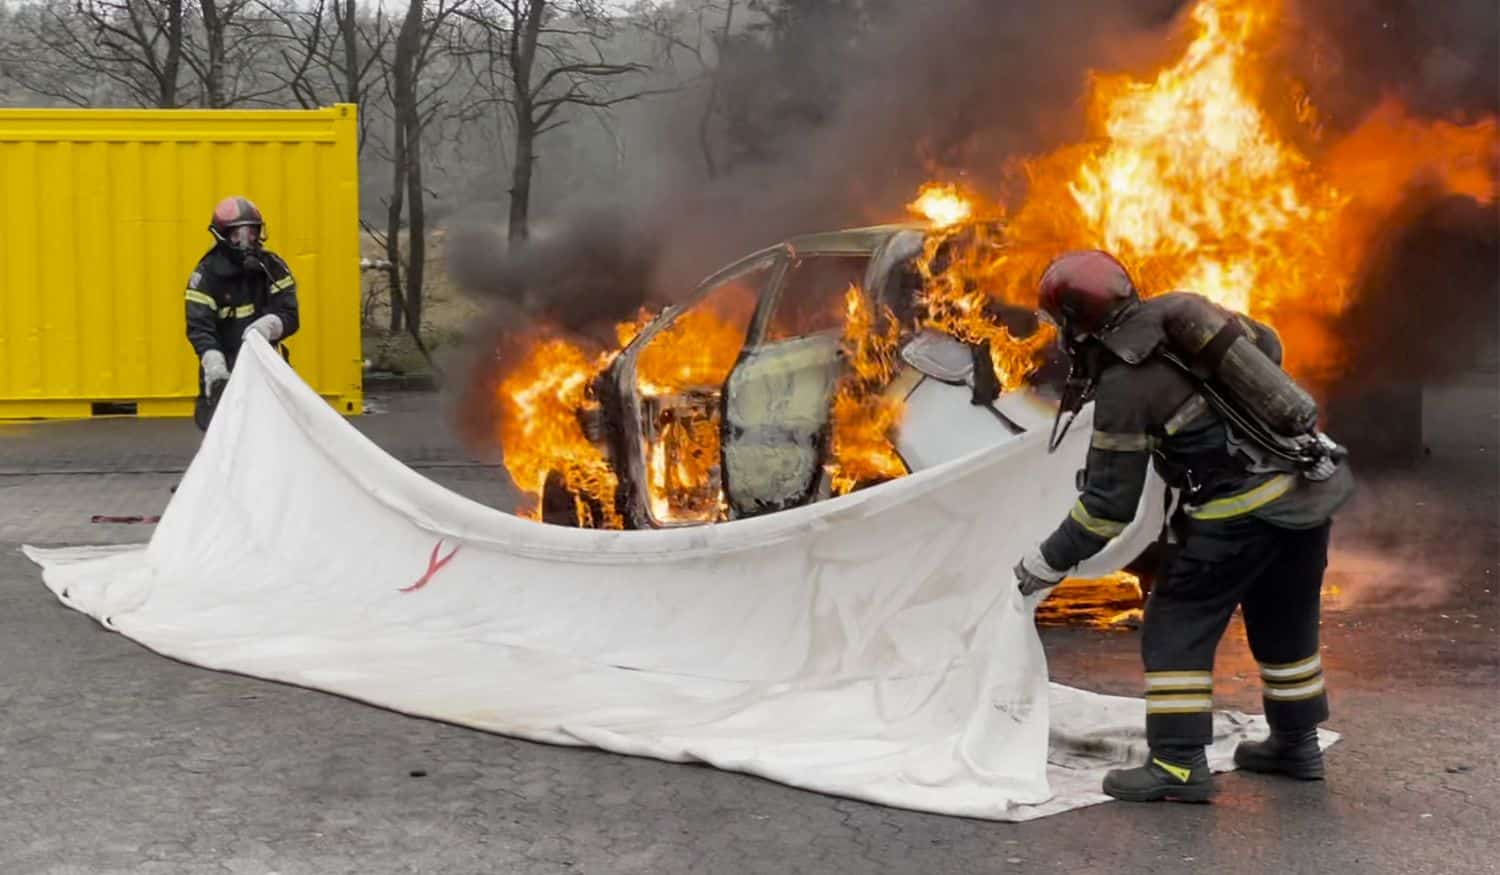 EV car on fire and the usage of a Fire Isolator blanket